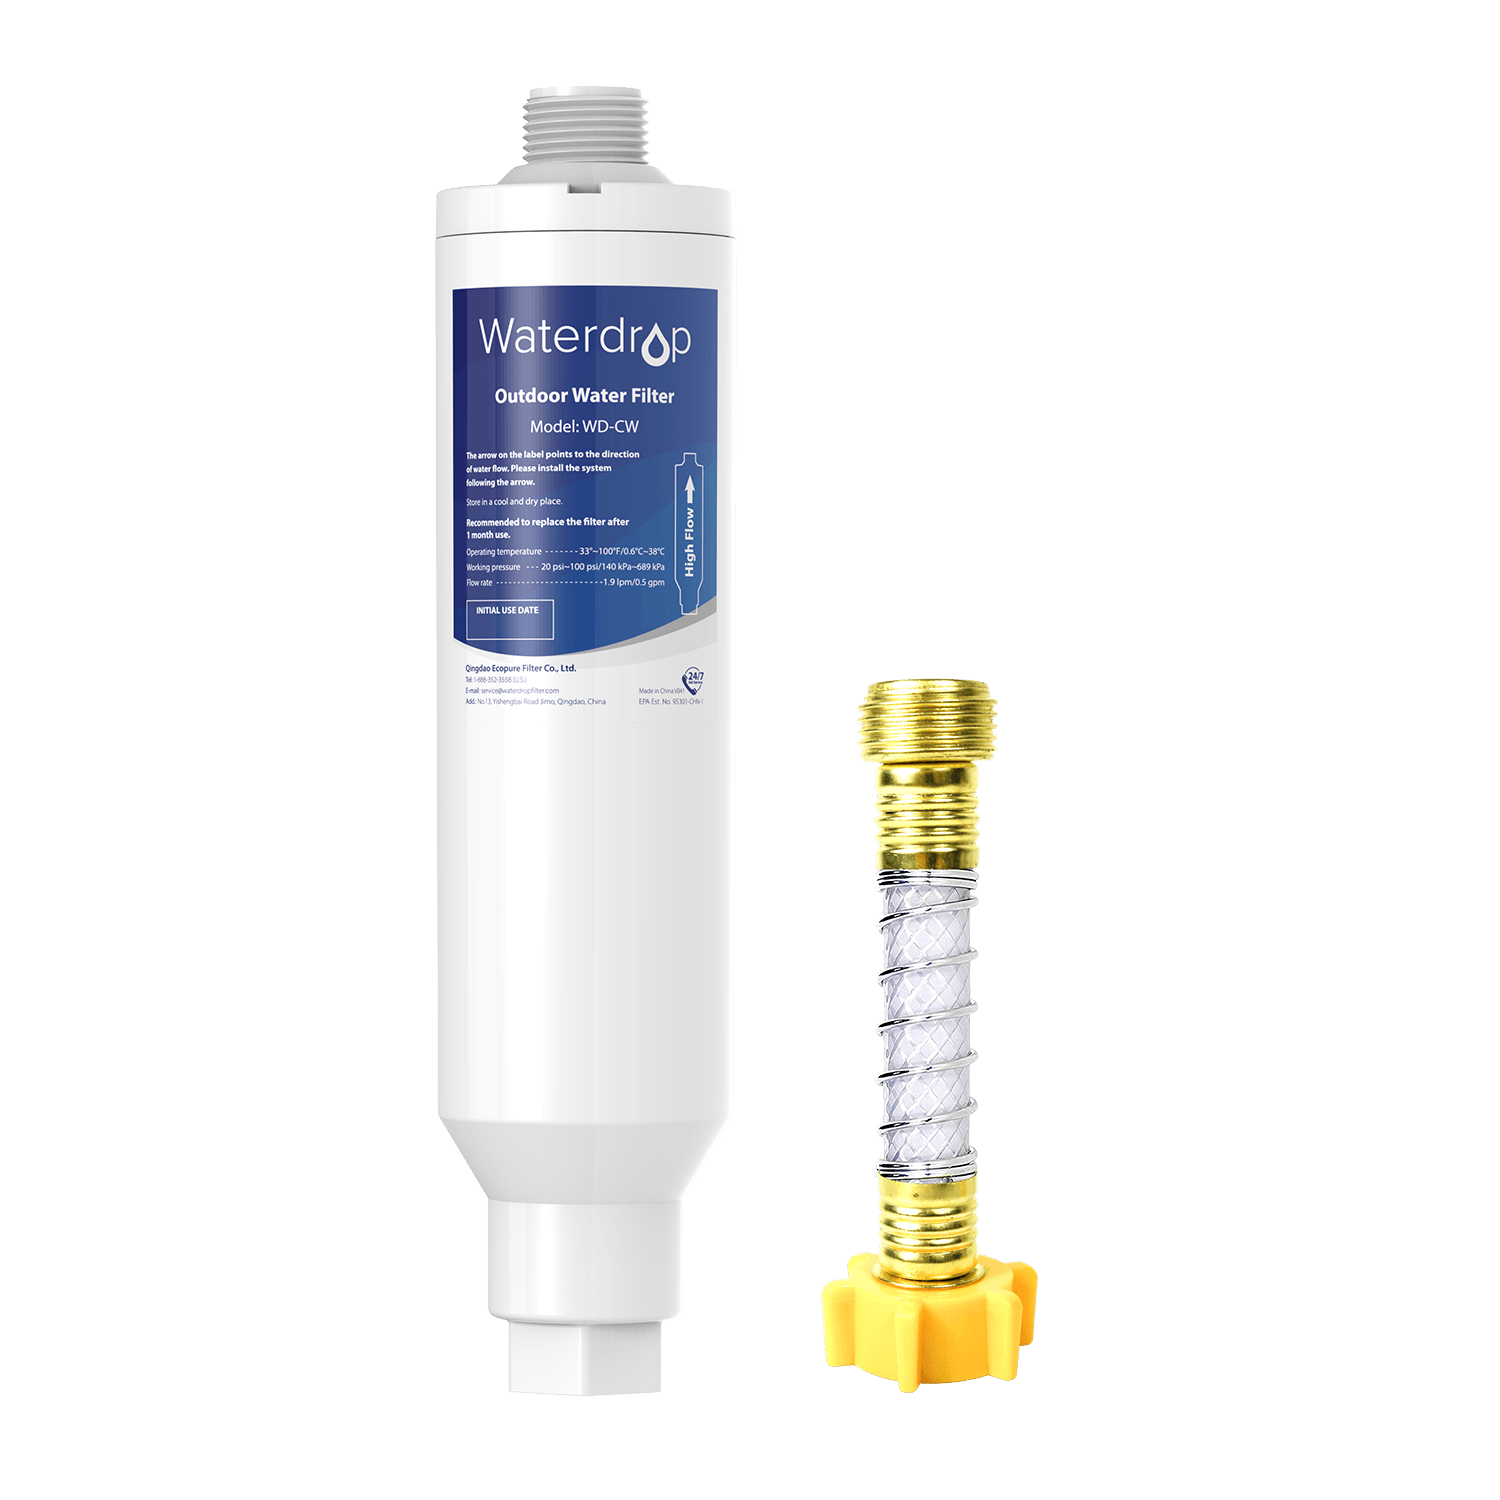 RV Inline Water Filter with Flexible Hose Protector